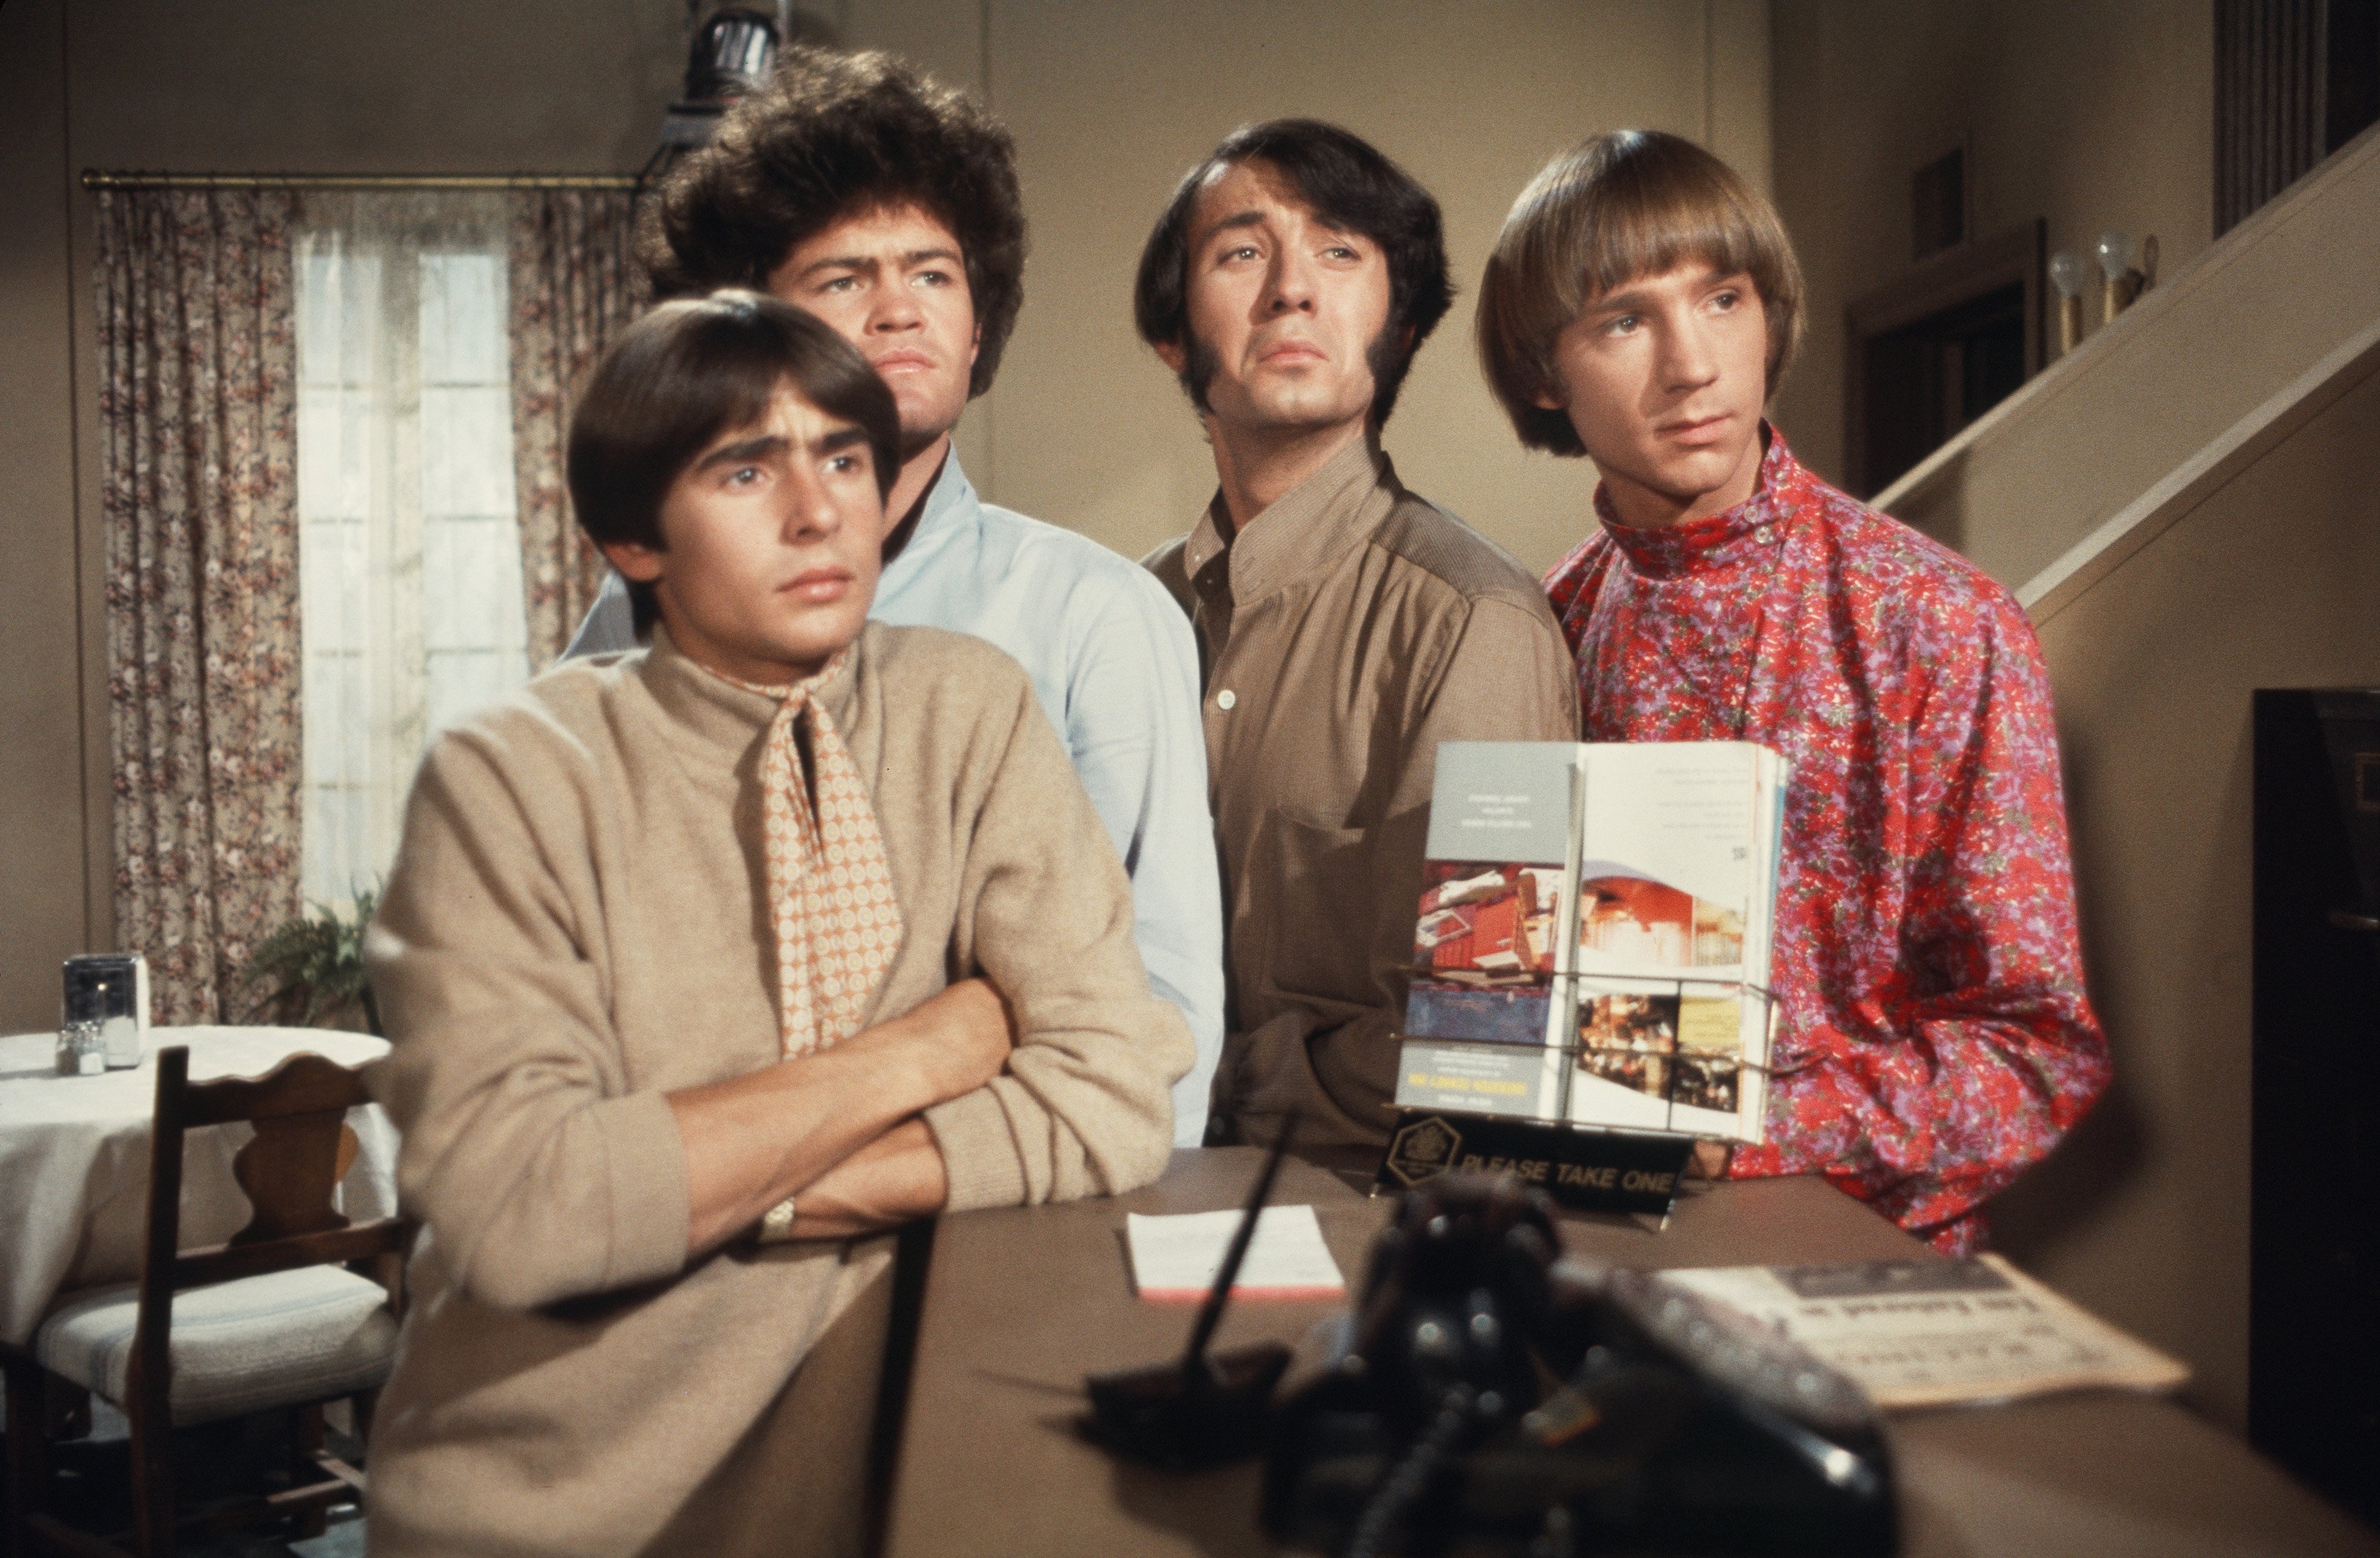 The Monkees' Davy Jones, Mickey Dolenz, Mike Nesmith, and Peter Tork at a piano